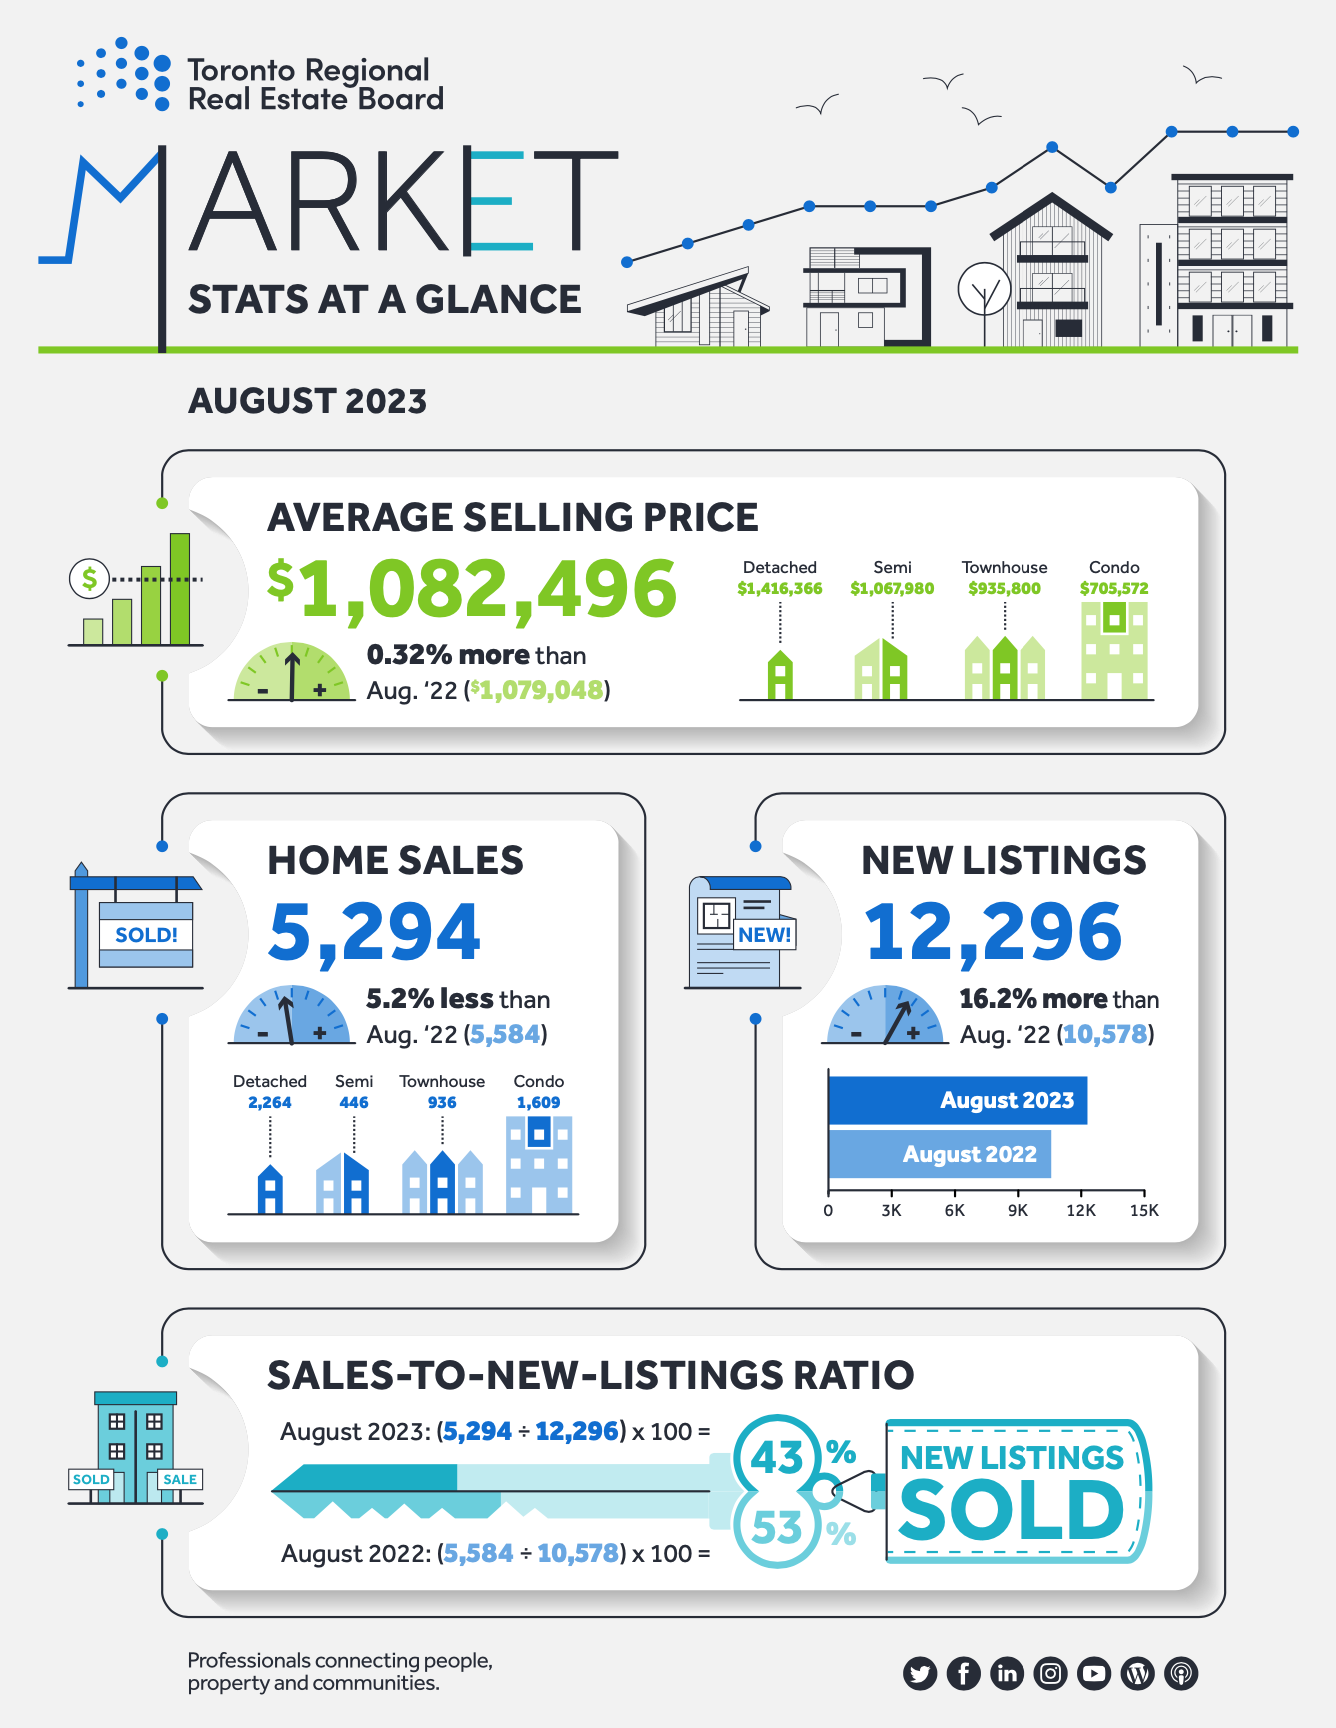 Toronto Regional Real Estate Board - Market Stats At A Glance - August 2023